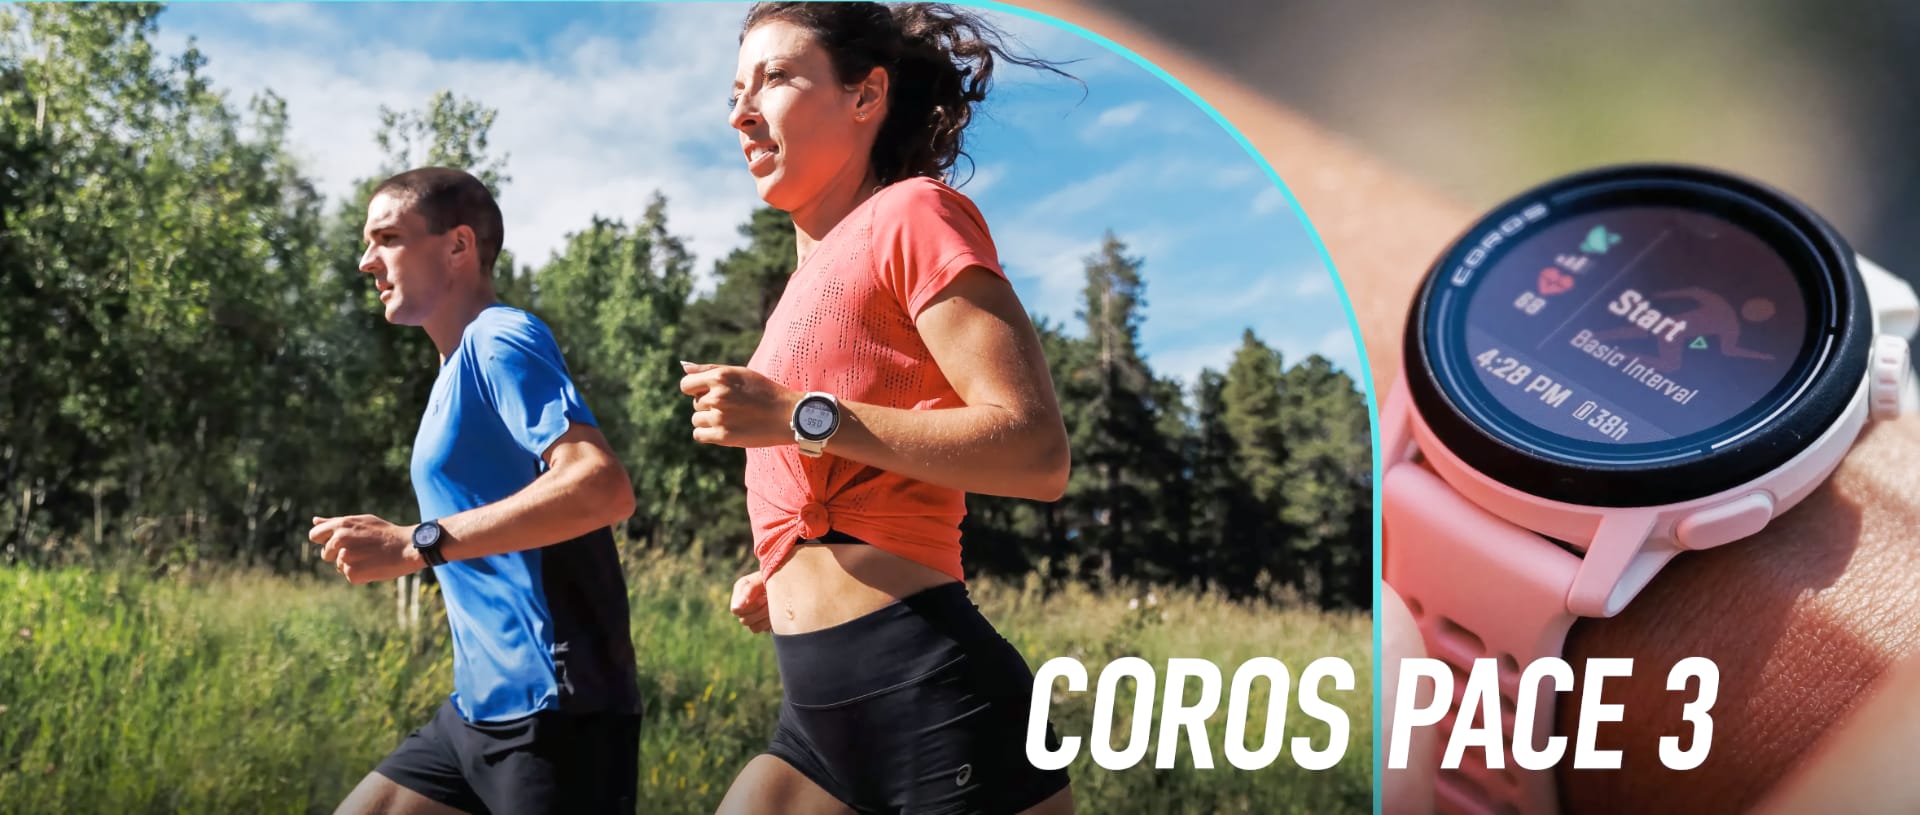 Introducing the Coros Pace 3 WPACE3-BLK Watch – a standout contender in the realm of affordable running watches and a strong contender for the title of the best running watch of the year. 